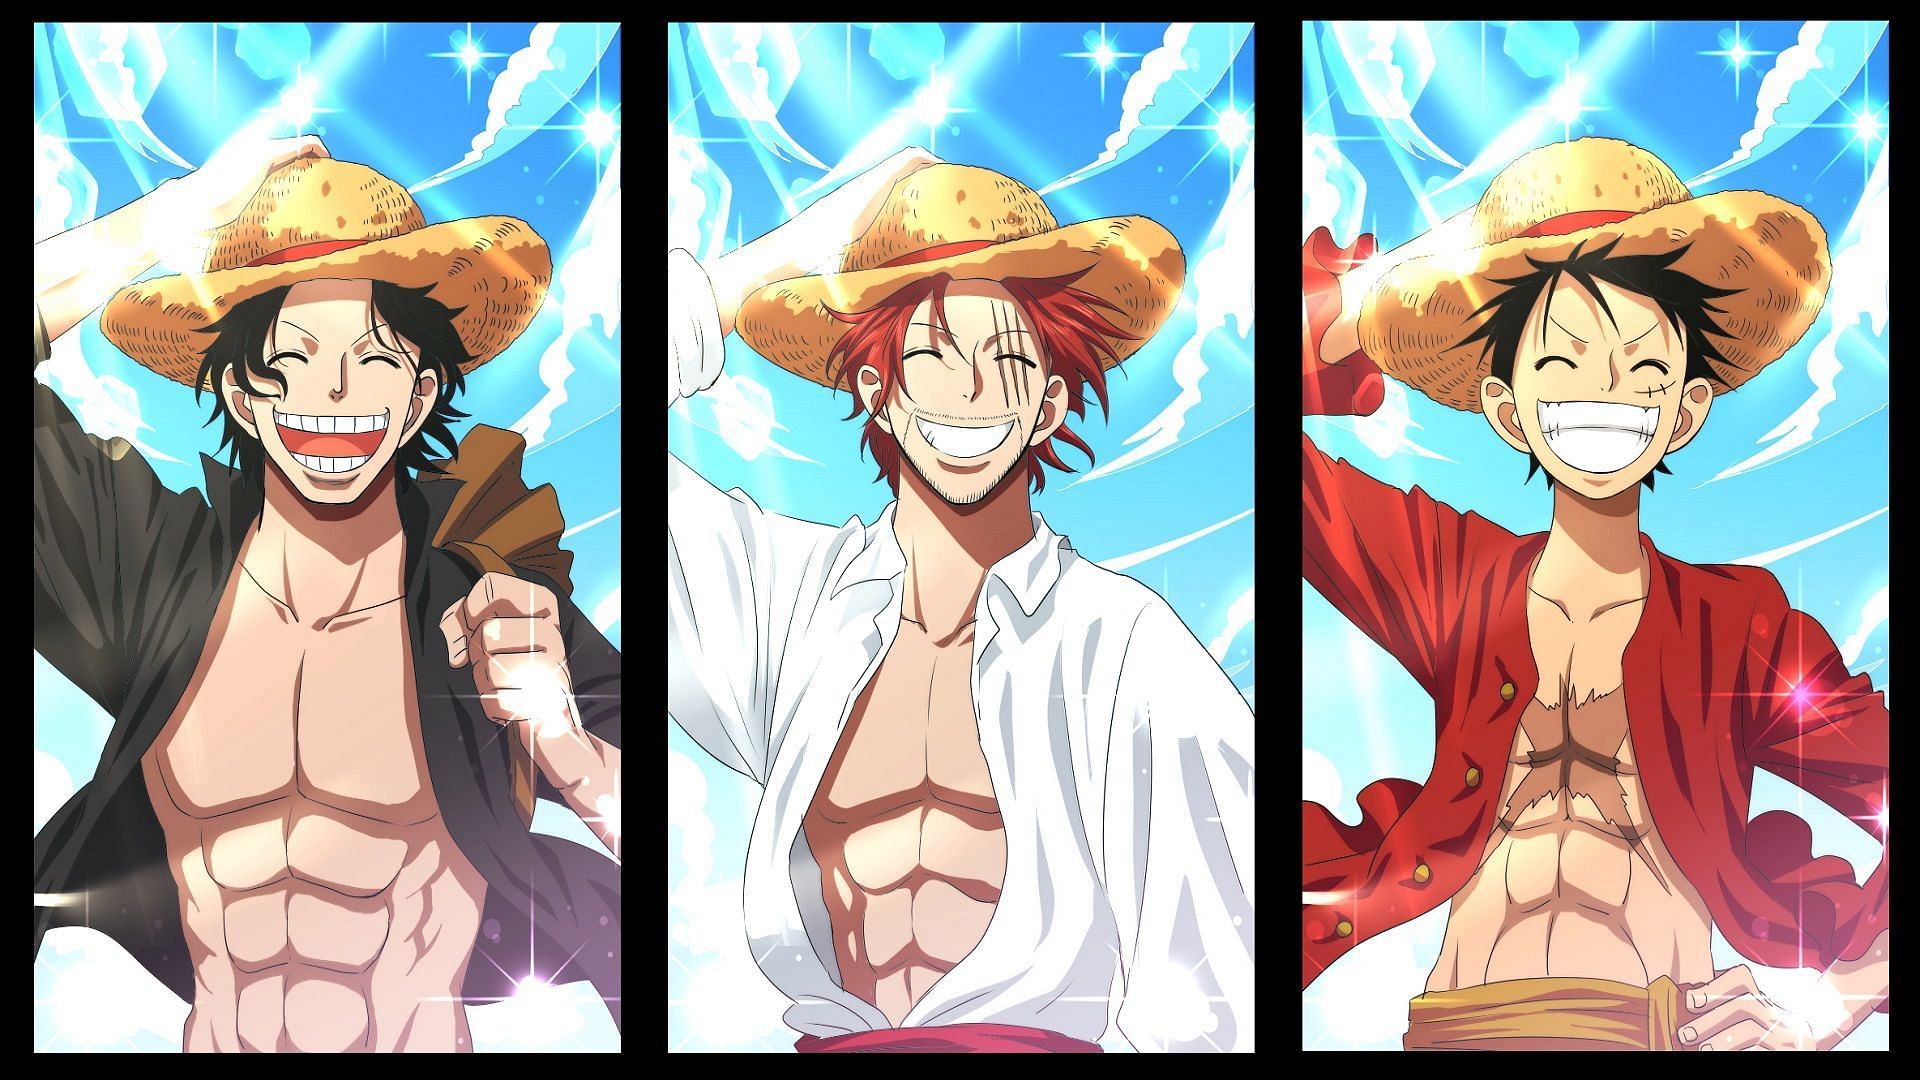 Roger, Shanks, and Luffy are connected through the same straw hat (Image via Eiichiro Oda/Shueisha, One Piece)